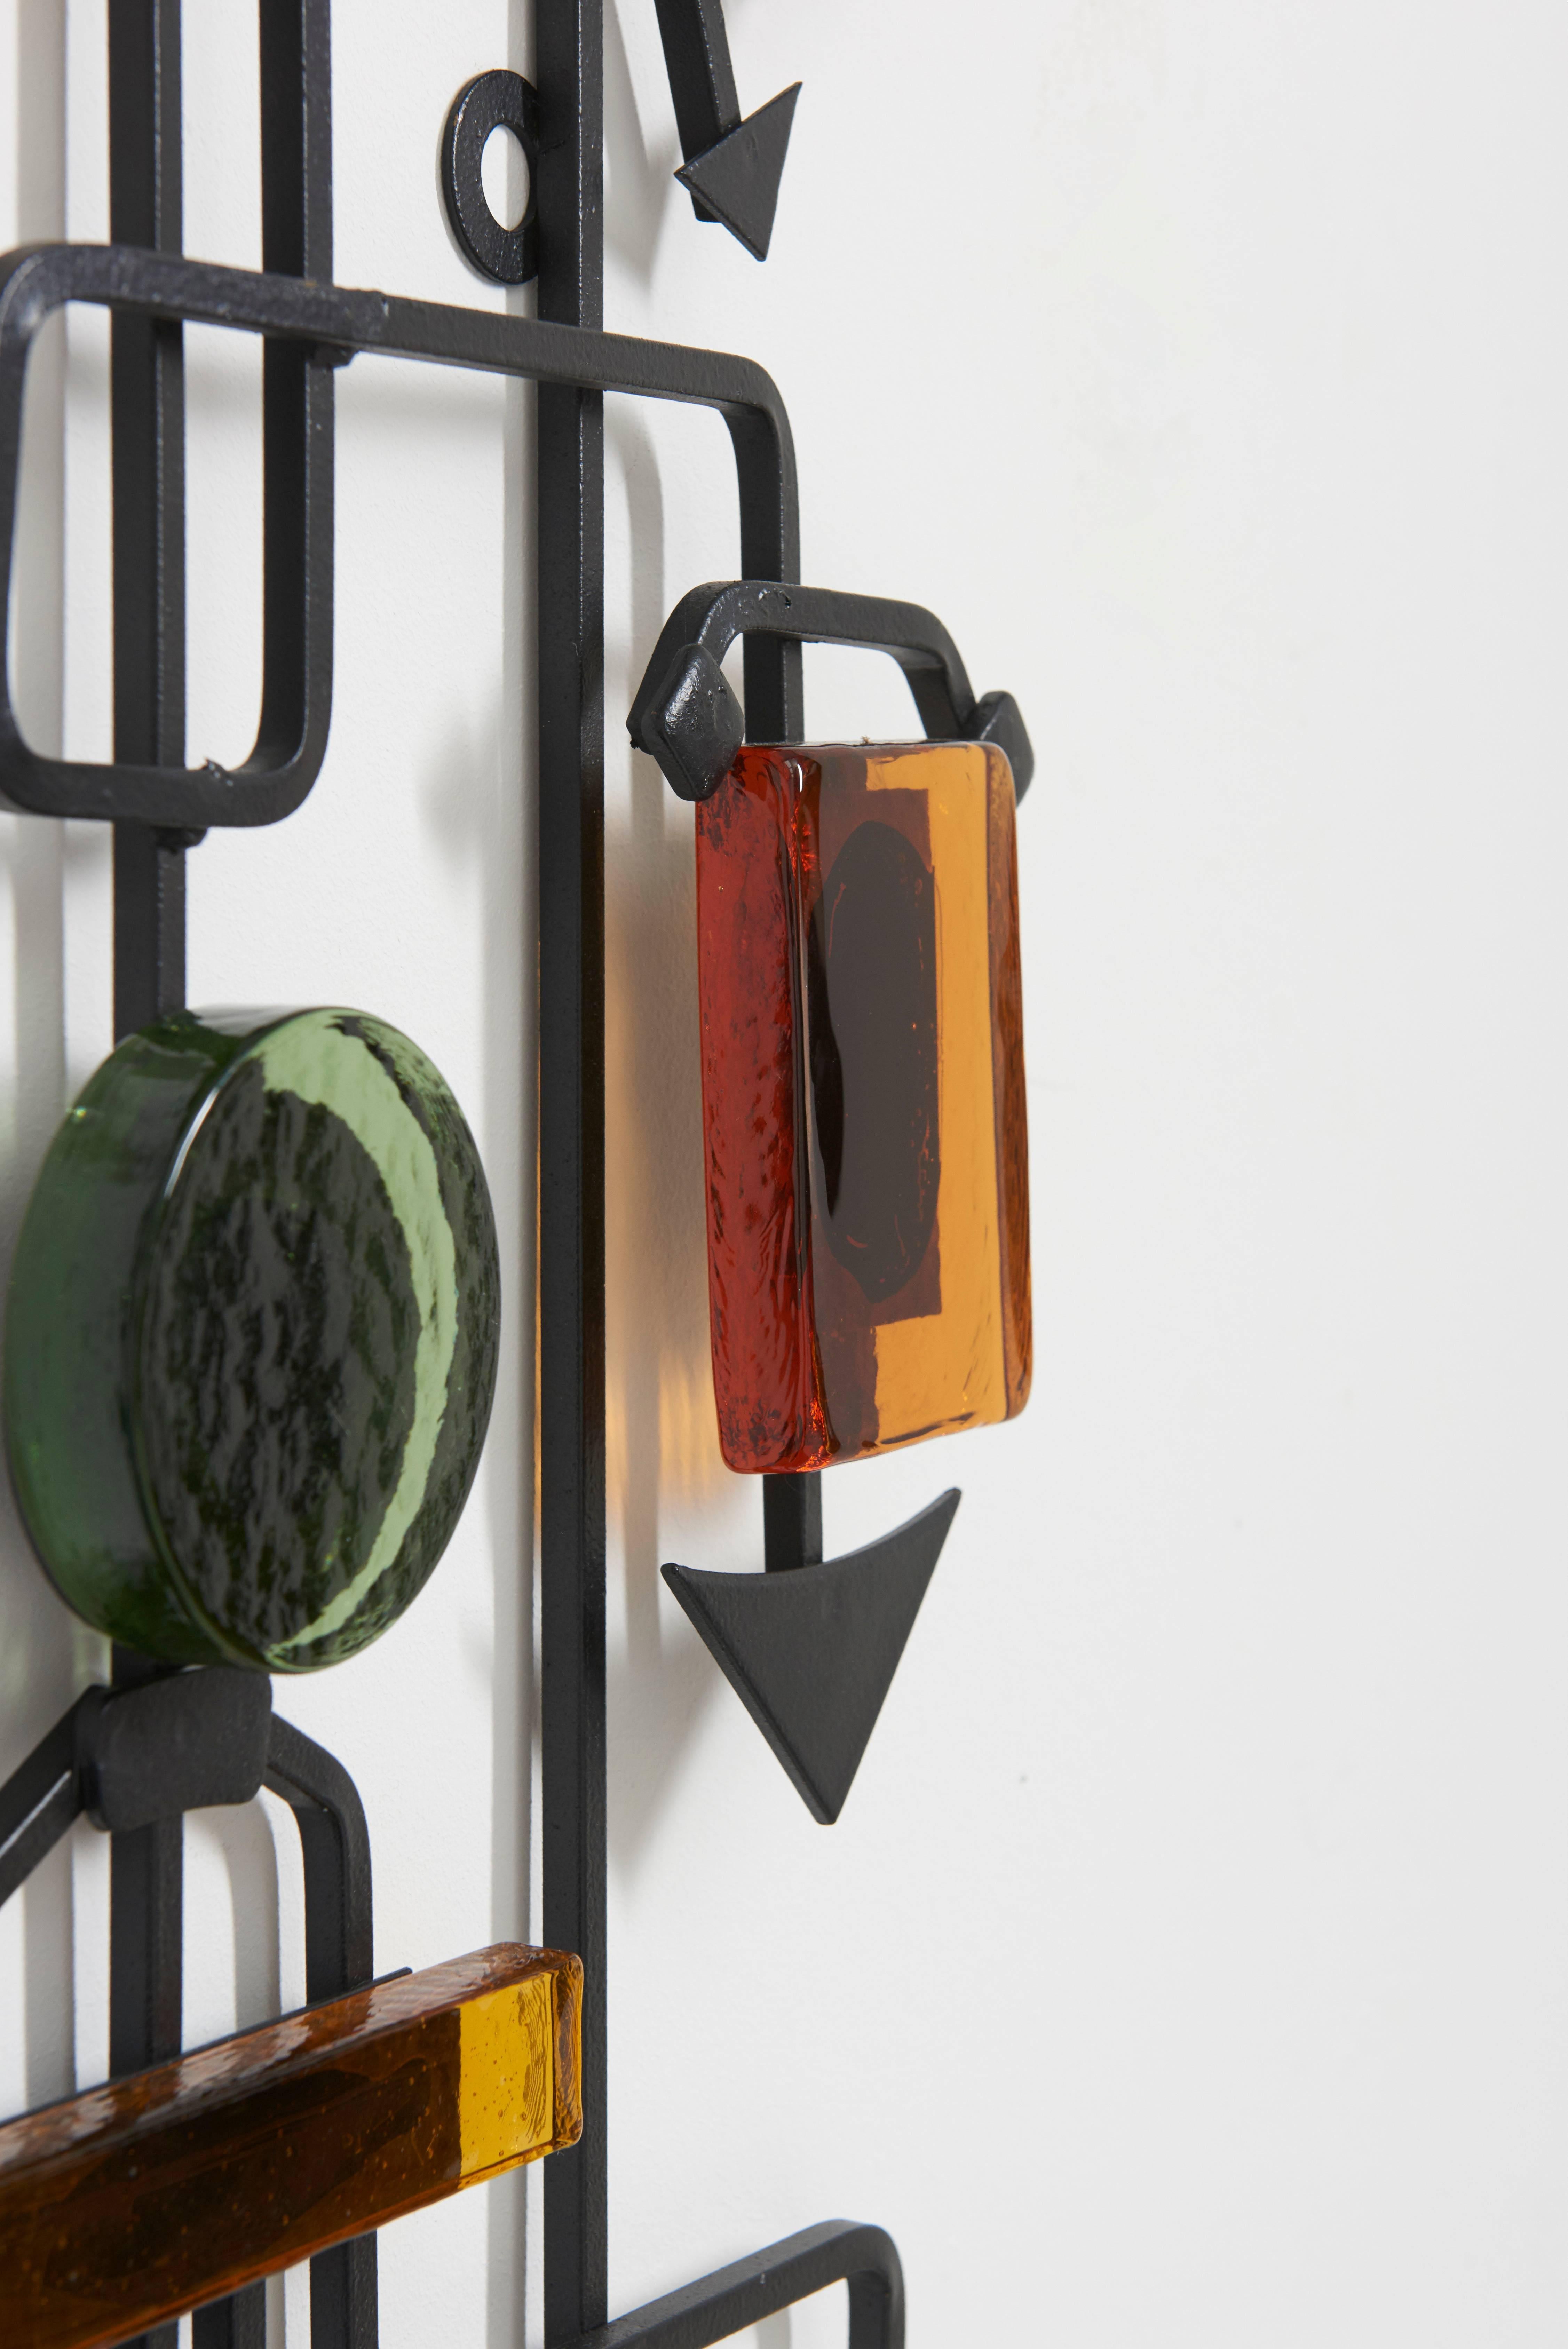 This original Eric Hoglund for Kosta Boda wall sculpture was made of hand-wrought iron and rectangular colored glass pieces in amber, blue and green in various sizes,
Swedish, circa 1960.